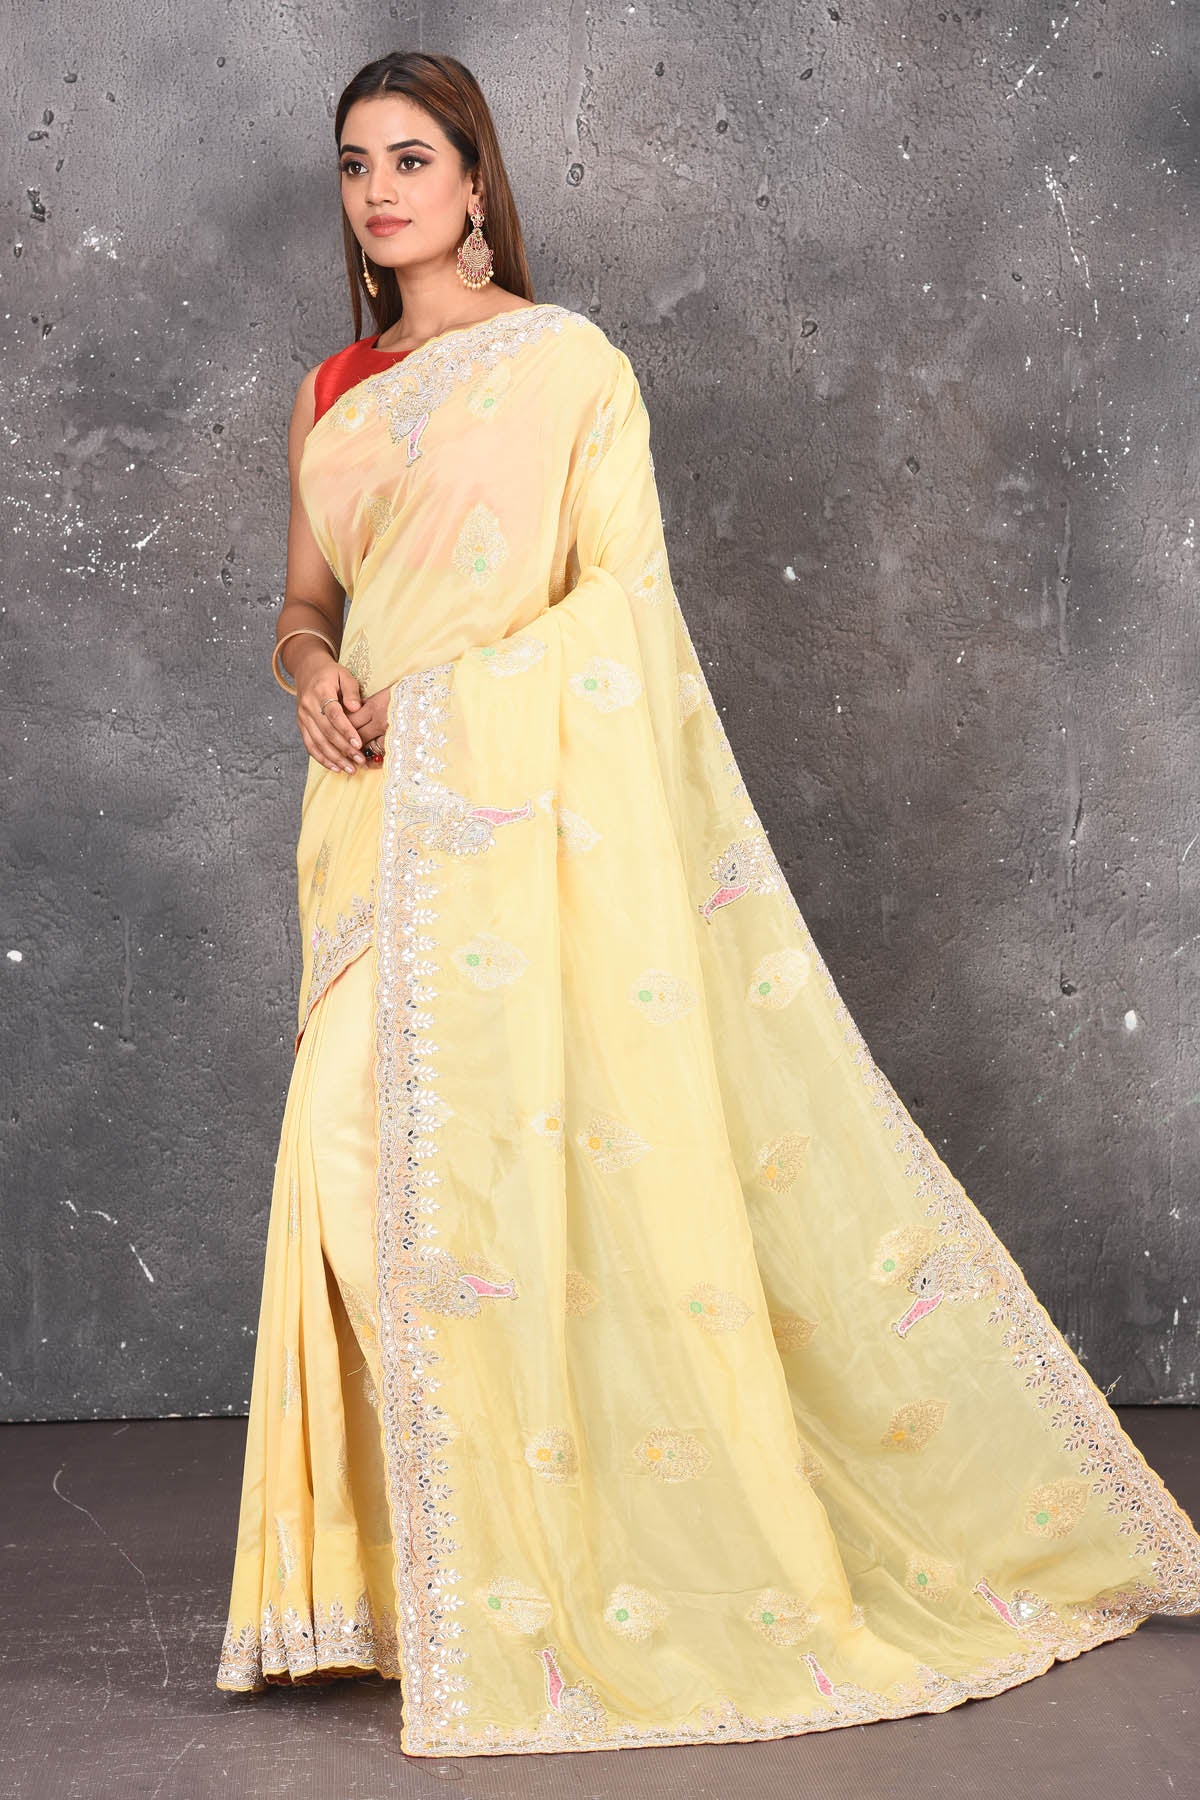 Buy this elegant lemon yellow gota patti mirror embroidered soft organza silk designer saree online in USA with beautiful peacock design threadwork, gota patti leaves and dazzling cut dana and mirror work details. Mirror bootis are scattered all over the saree to match the brightness of the happy look. Add this designer sari to your collection from Pure Elegance Indian fashion store in USA.-Side view with open pallu.